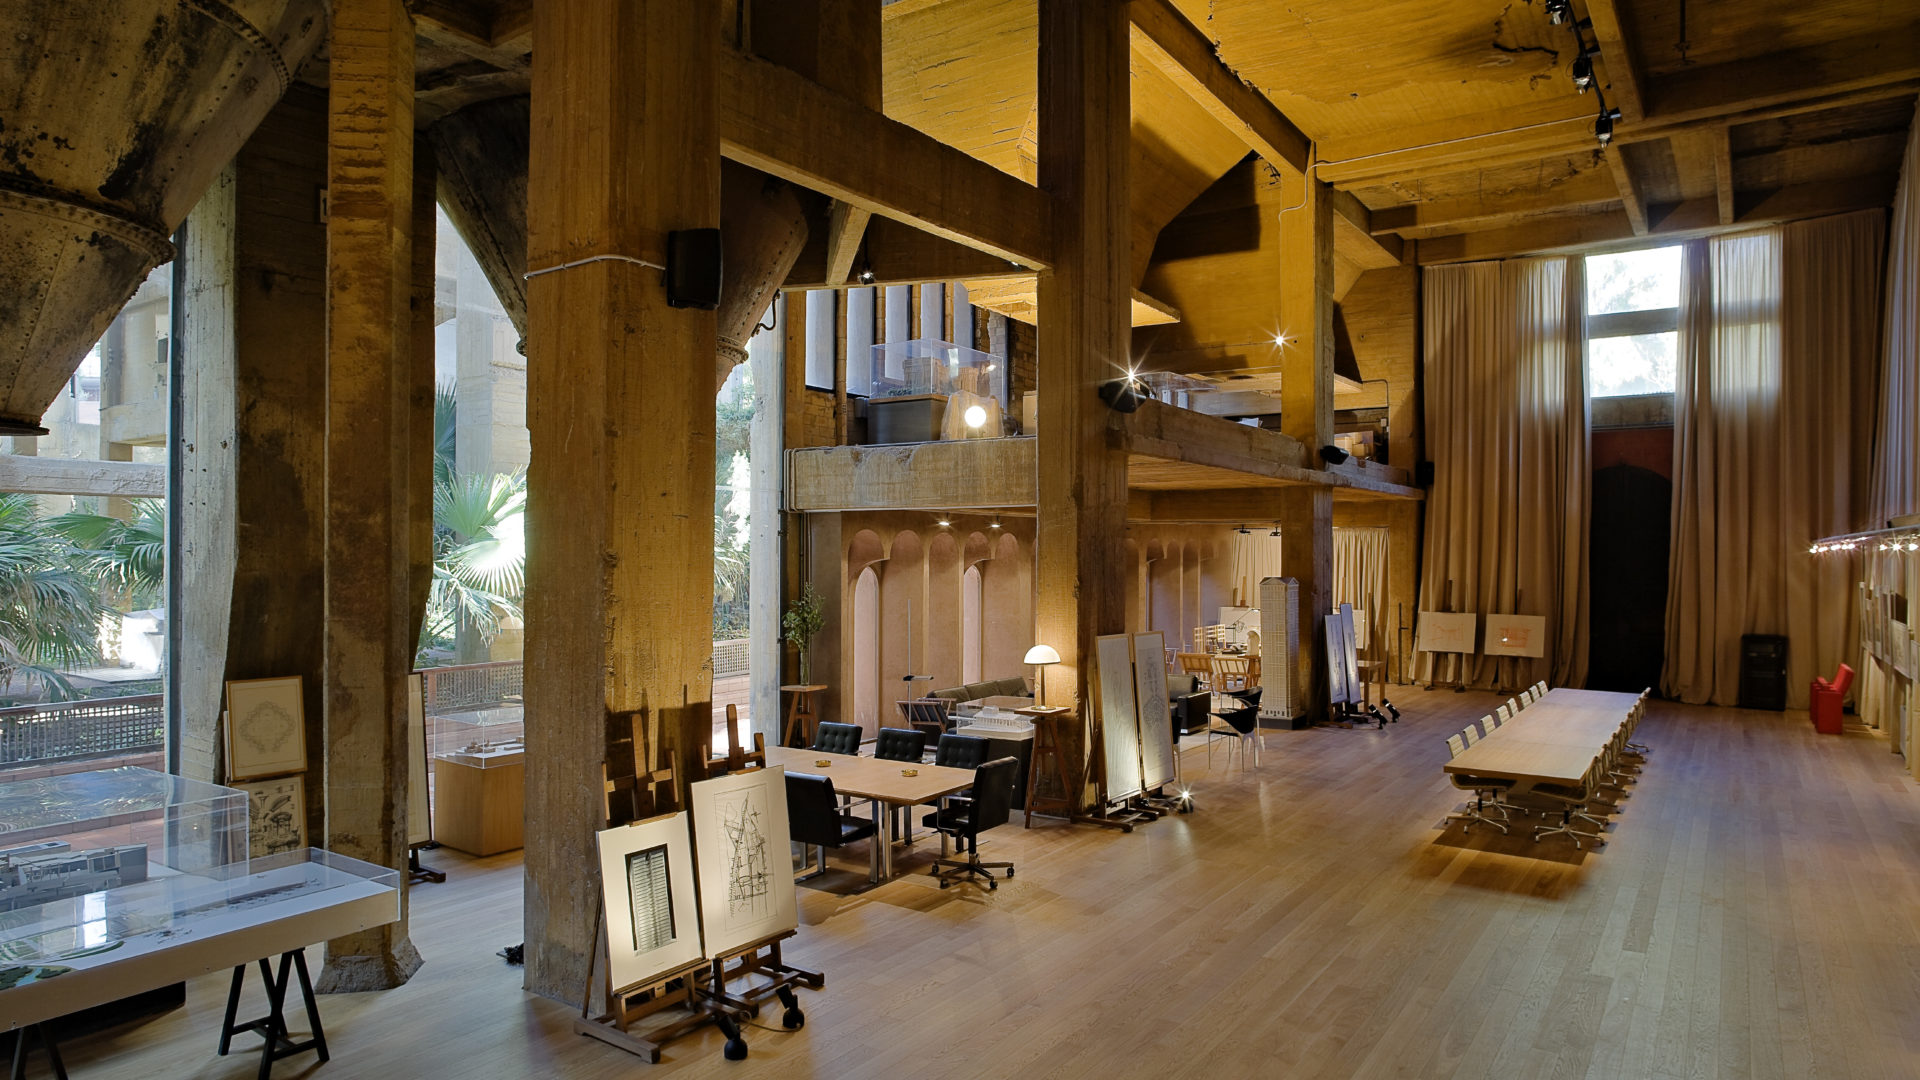 Design Inspiration: The Cement Factory by Ricardo Bofill, Catalonia, Spain